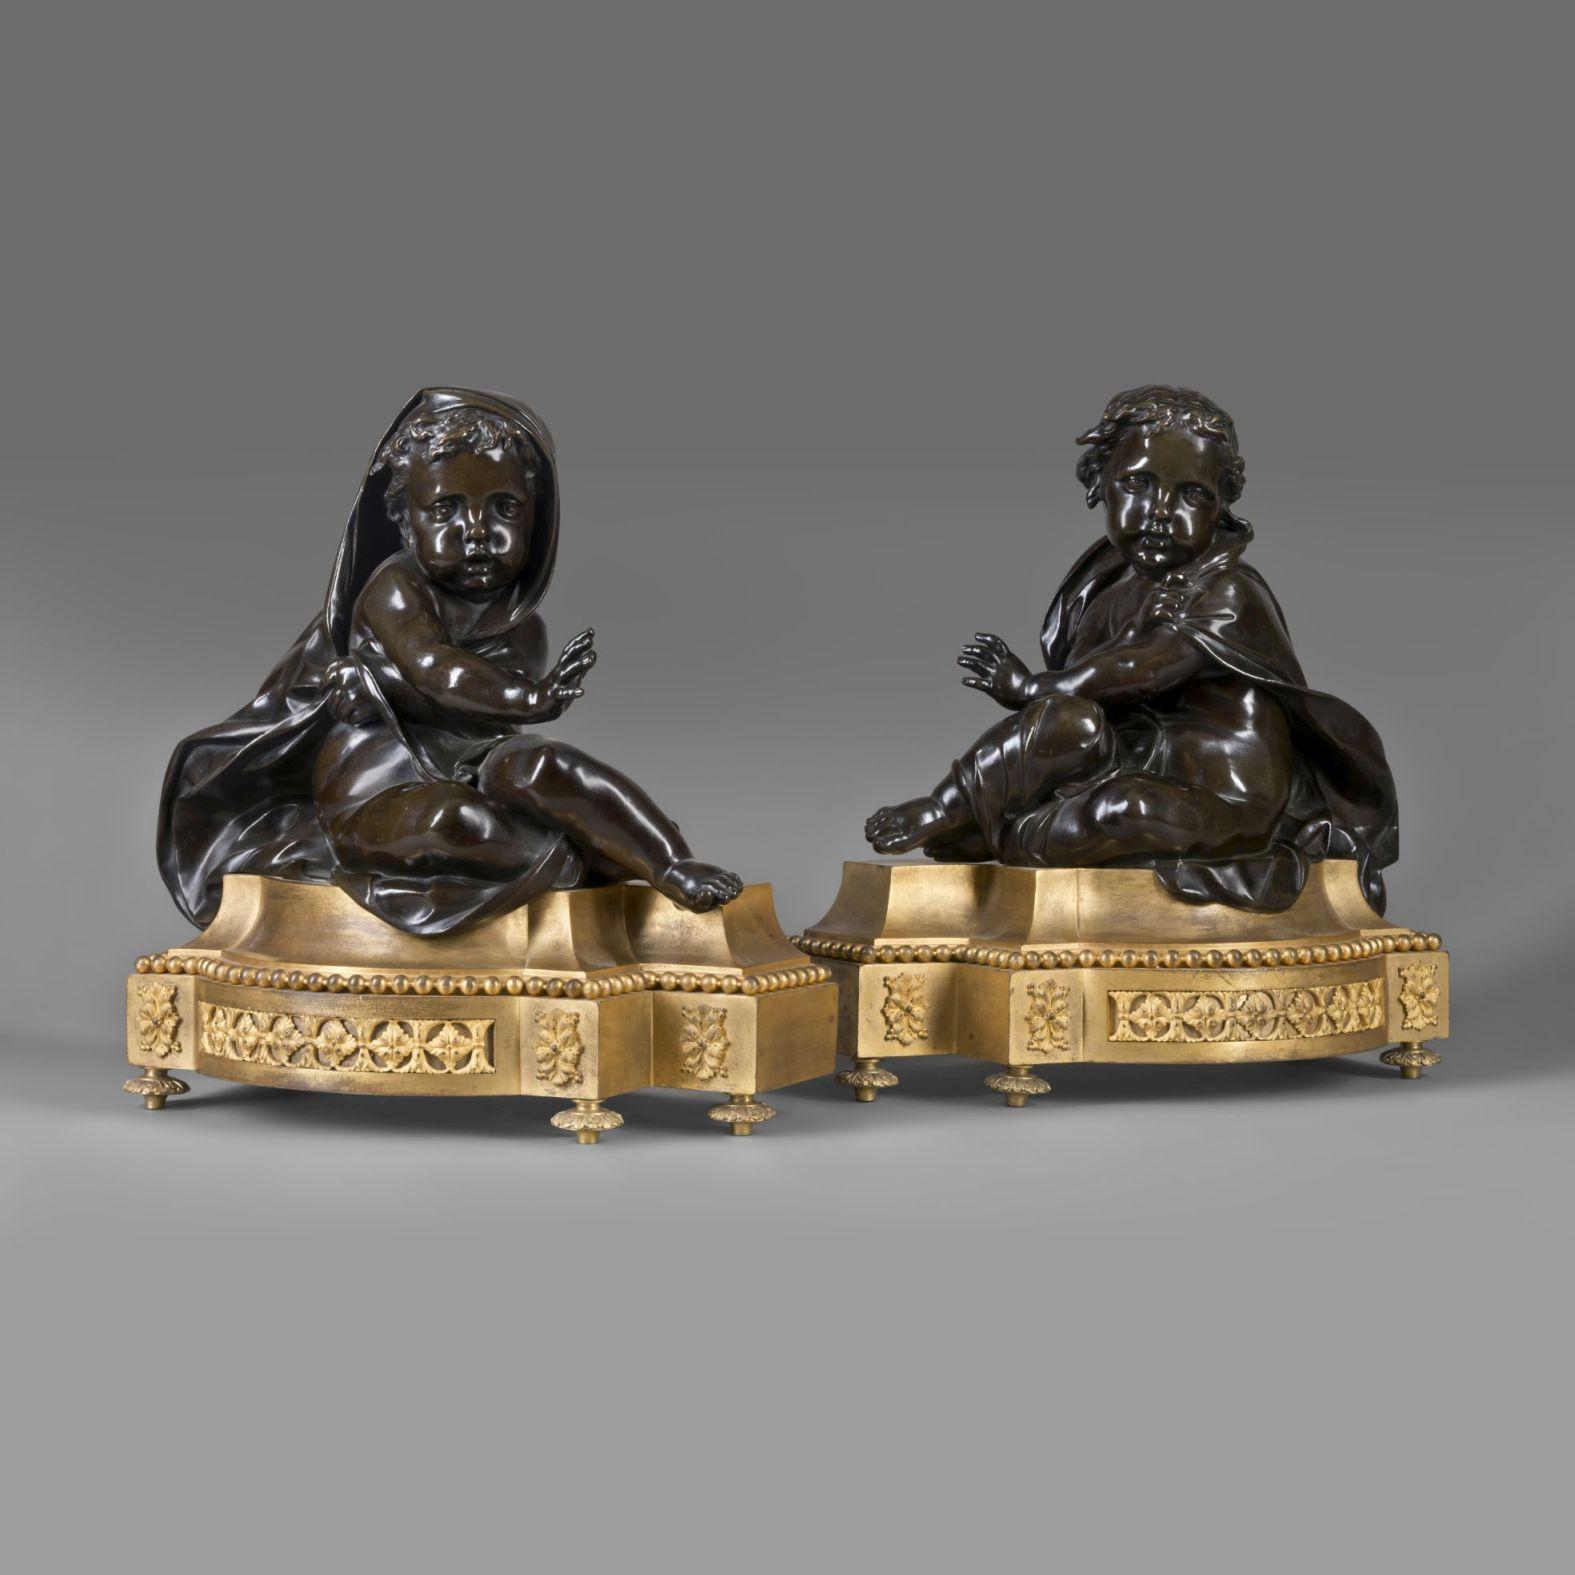 A Fine Pair of Louis XVI Style Gilt and Patinated Bronze Chenets Allegorical of Winter.

Each chenet is formed as seated putto clad in drapery, on shaped gilt-bronze plinth bases with acanthus panelled borders and raised on toupie feet.

French,